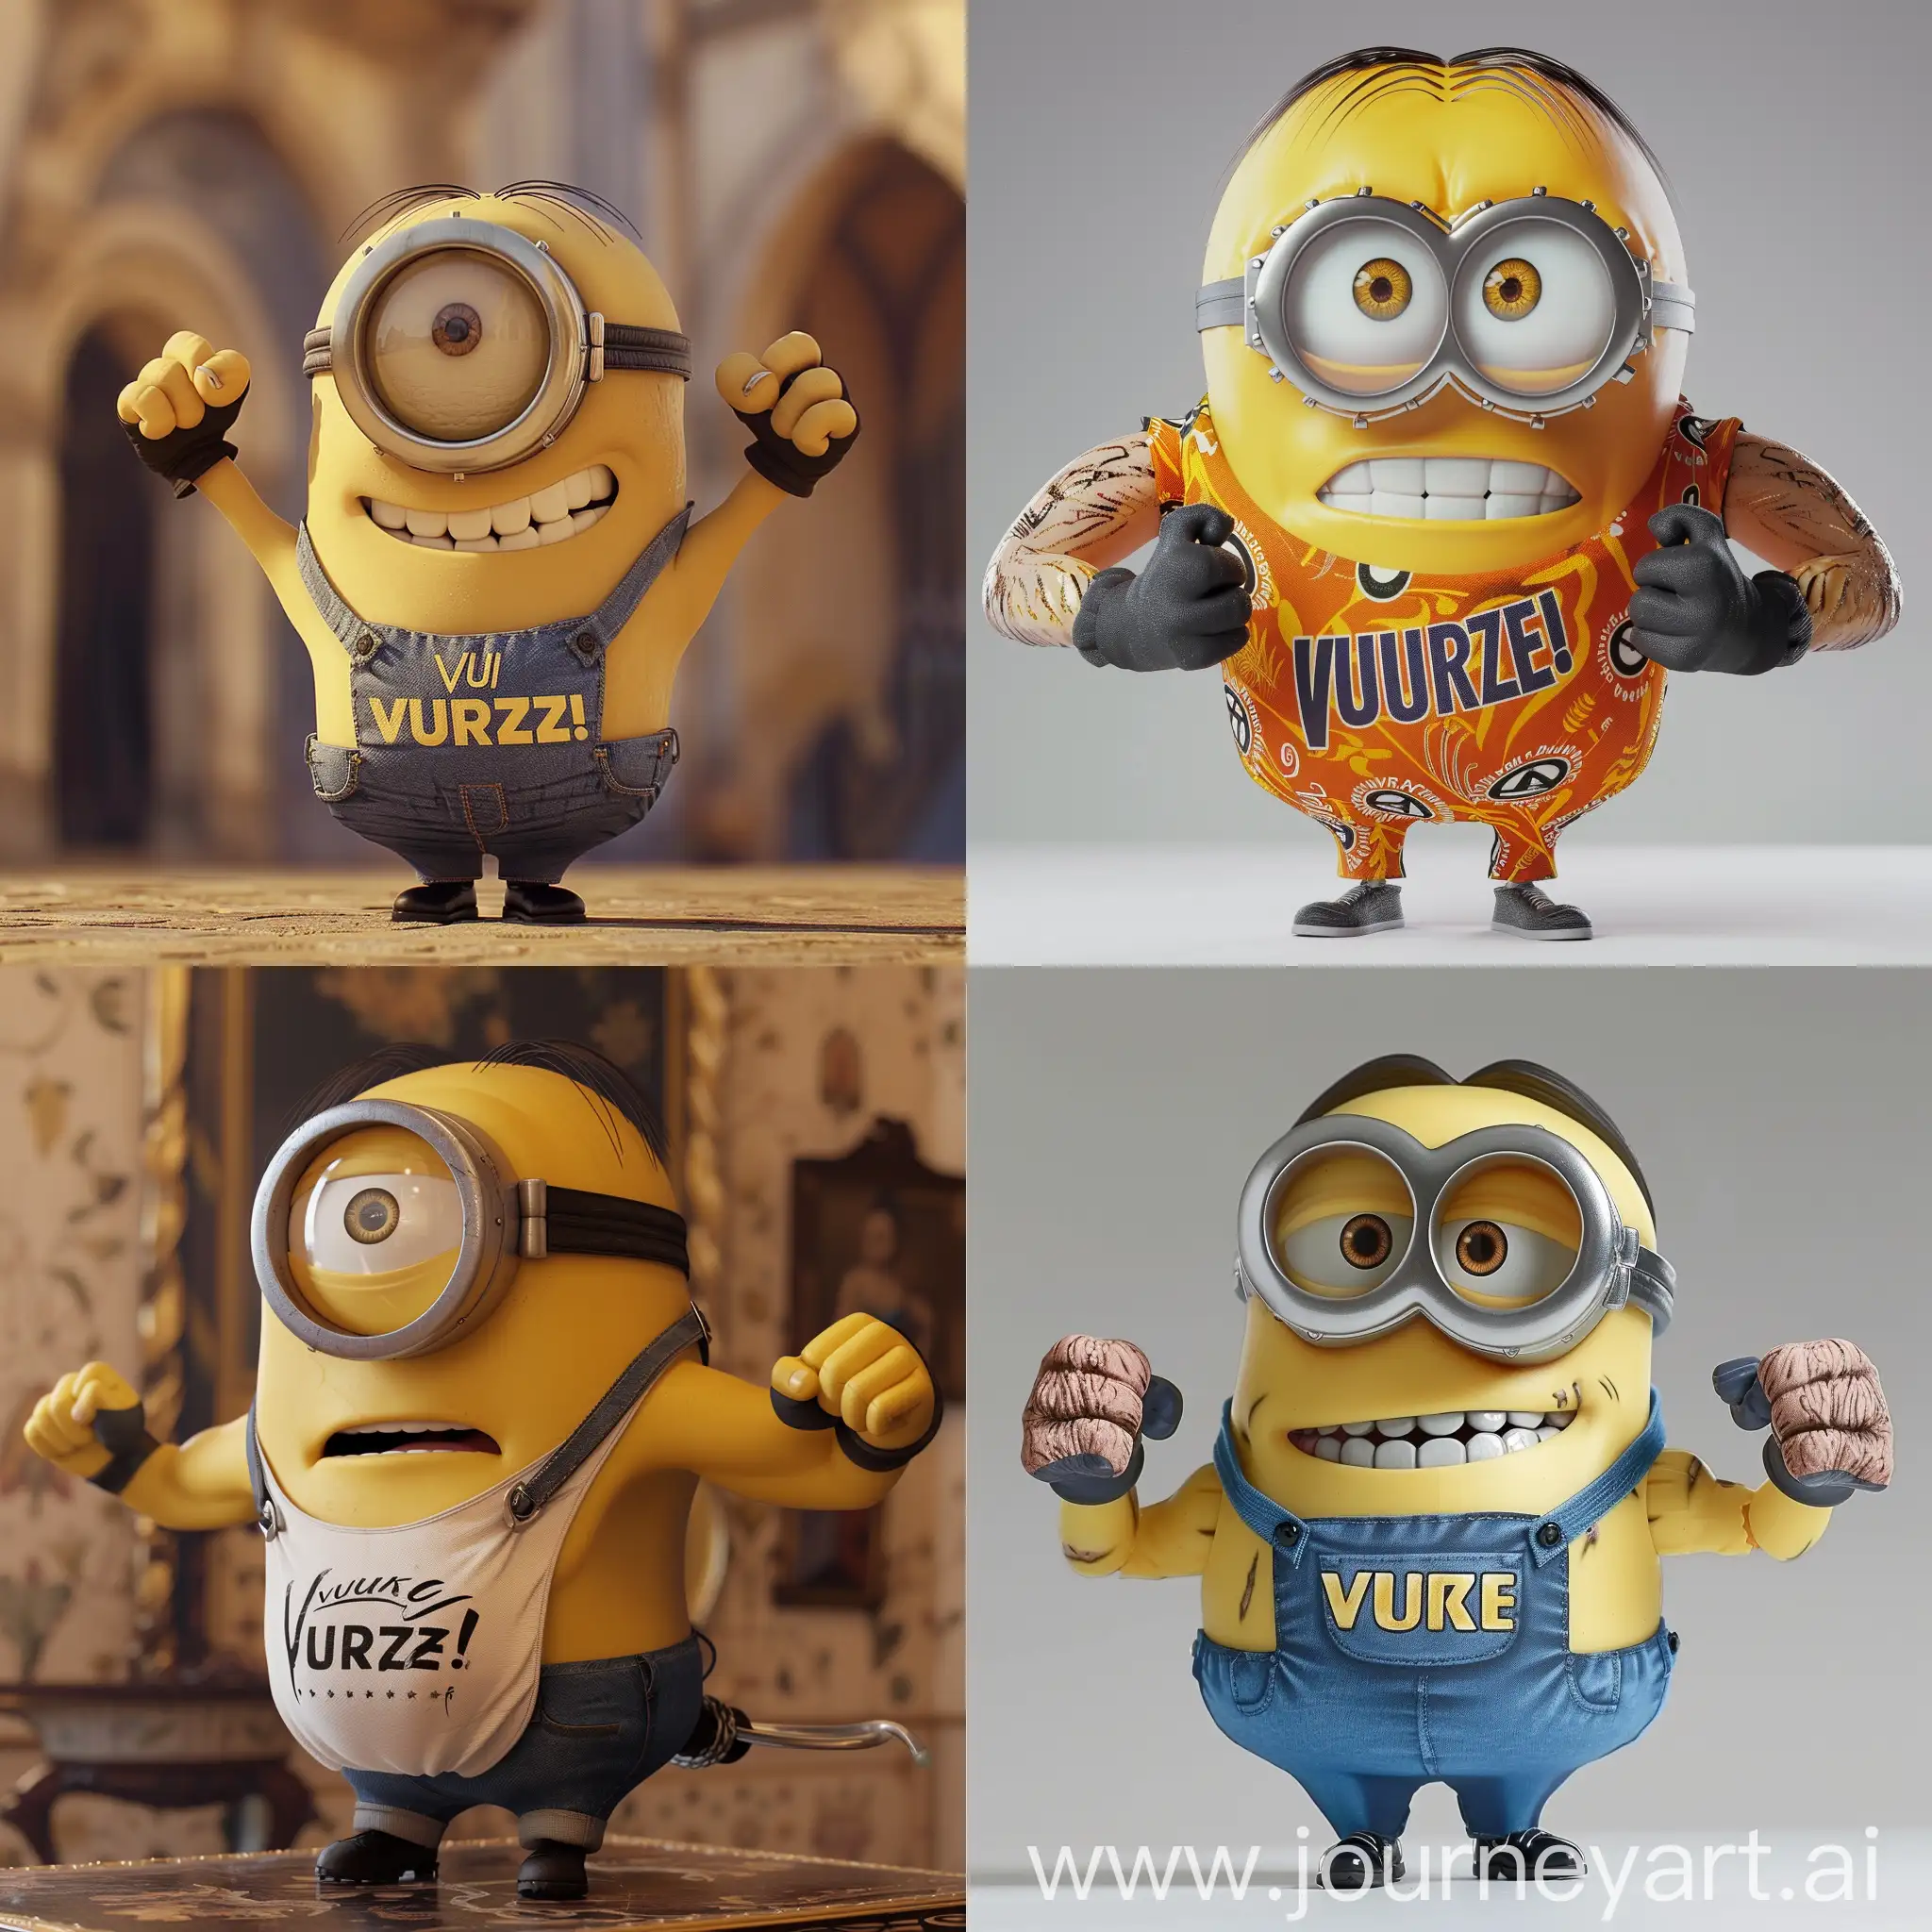 minion with muscle with a shirt that say "vurzeh"
